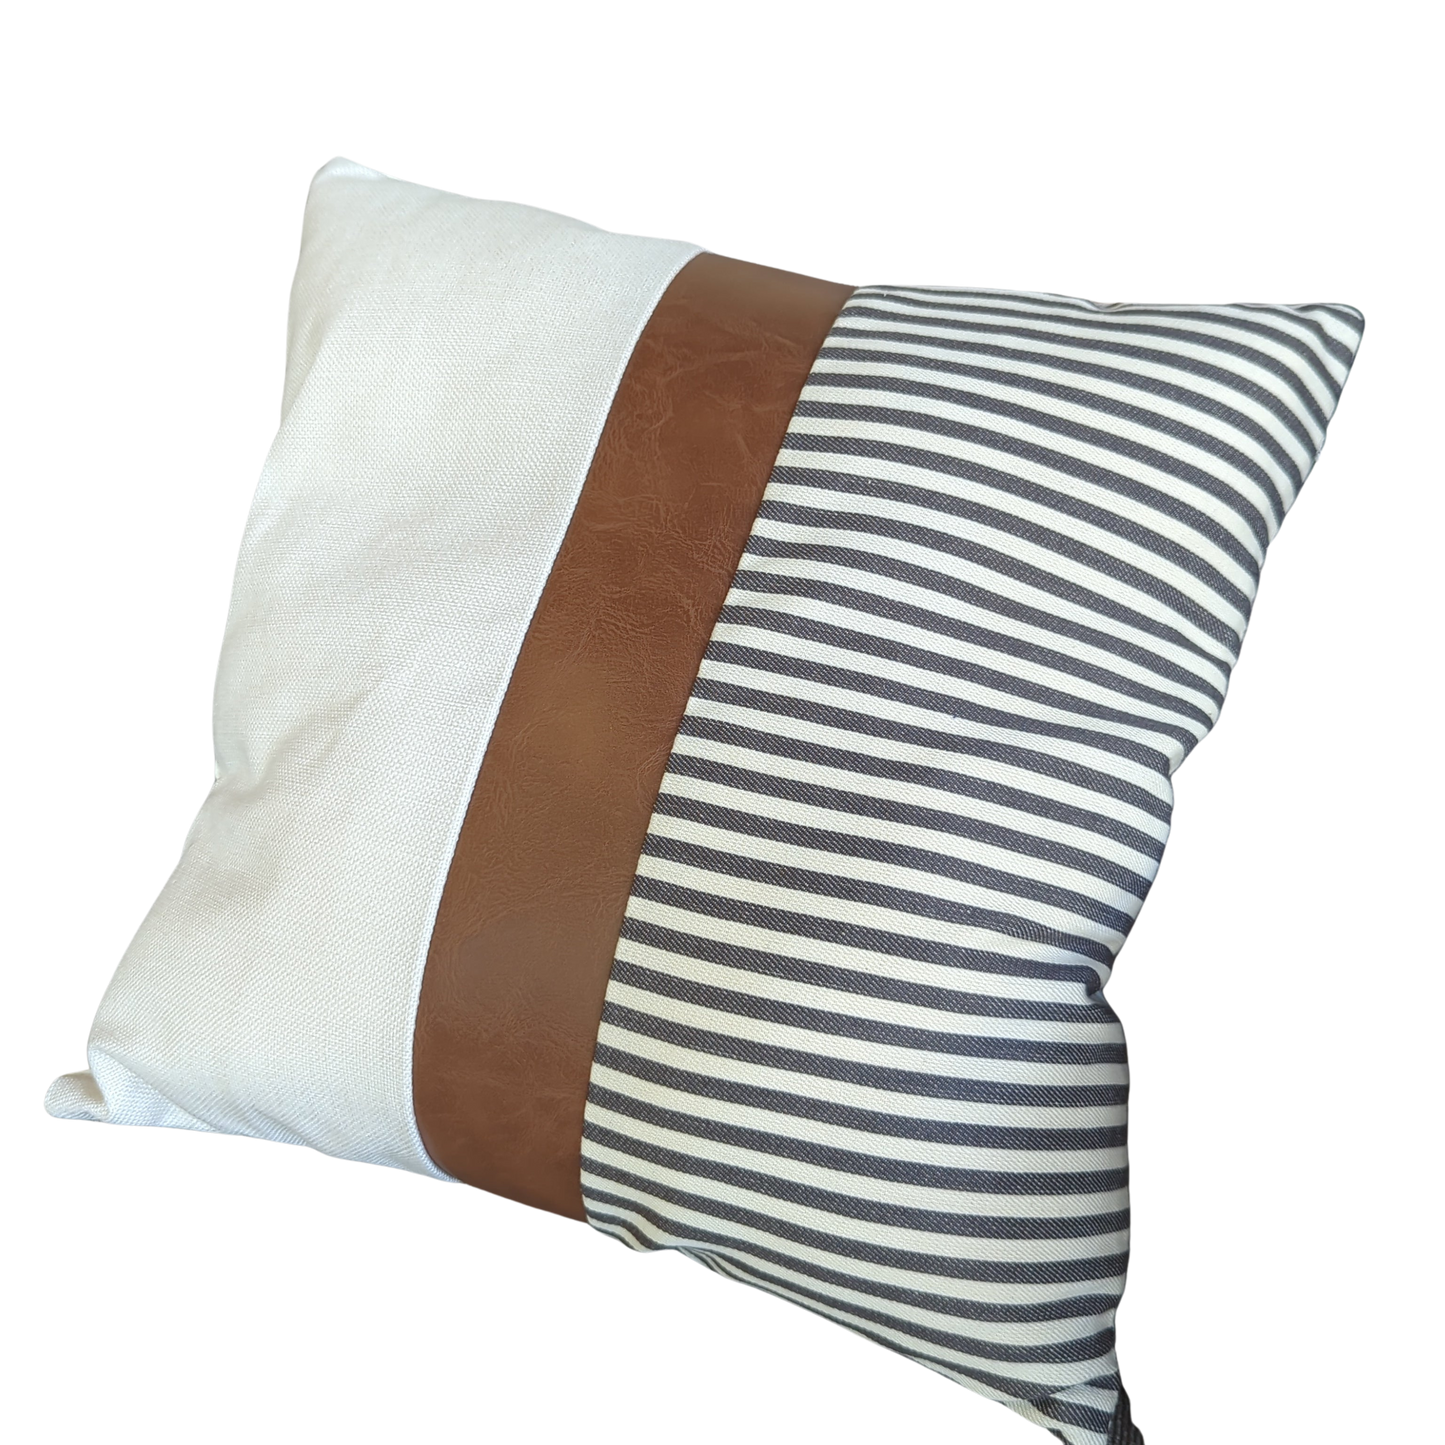 Striped Fabric and Faux Leather Medium Pillows 18"x18"